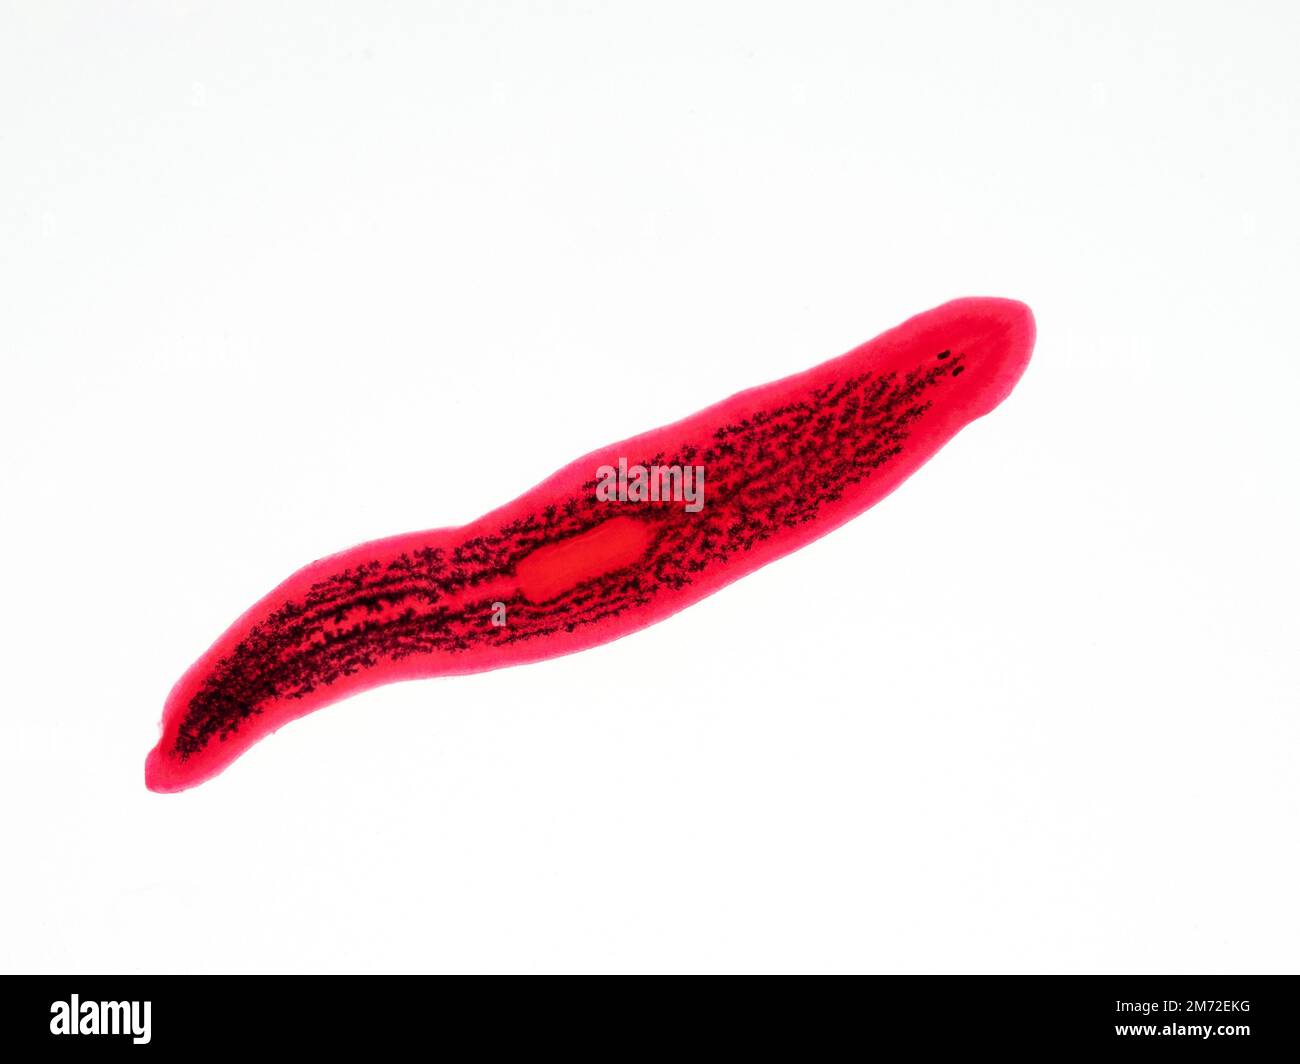 preserved and stained specimen of a freshwater planaria flatworm (triclad) that was fed with carbon to highlight its 3-lobed digestive tract in black Stock Photo